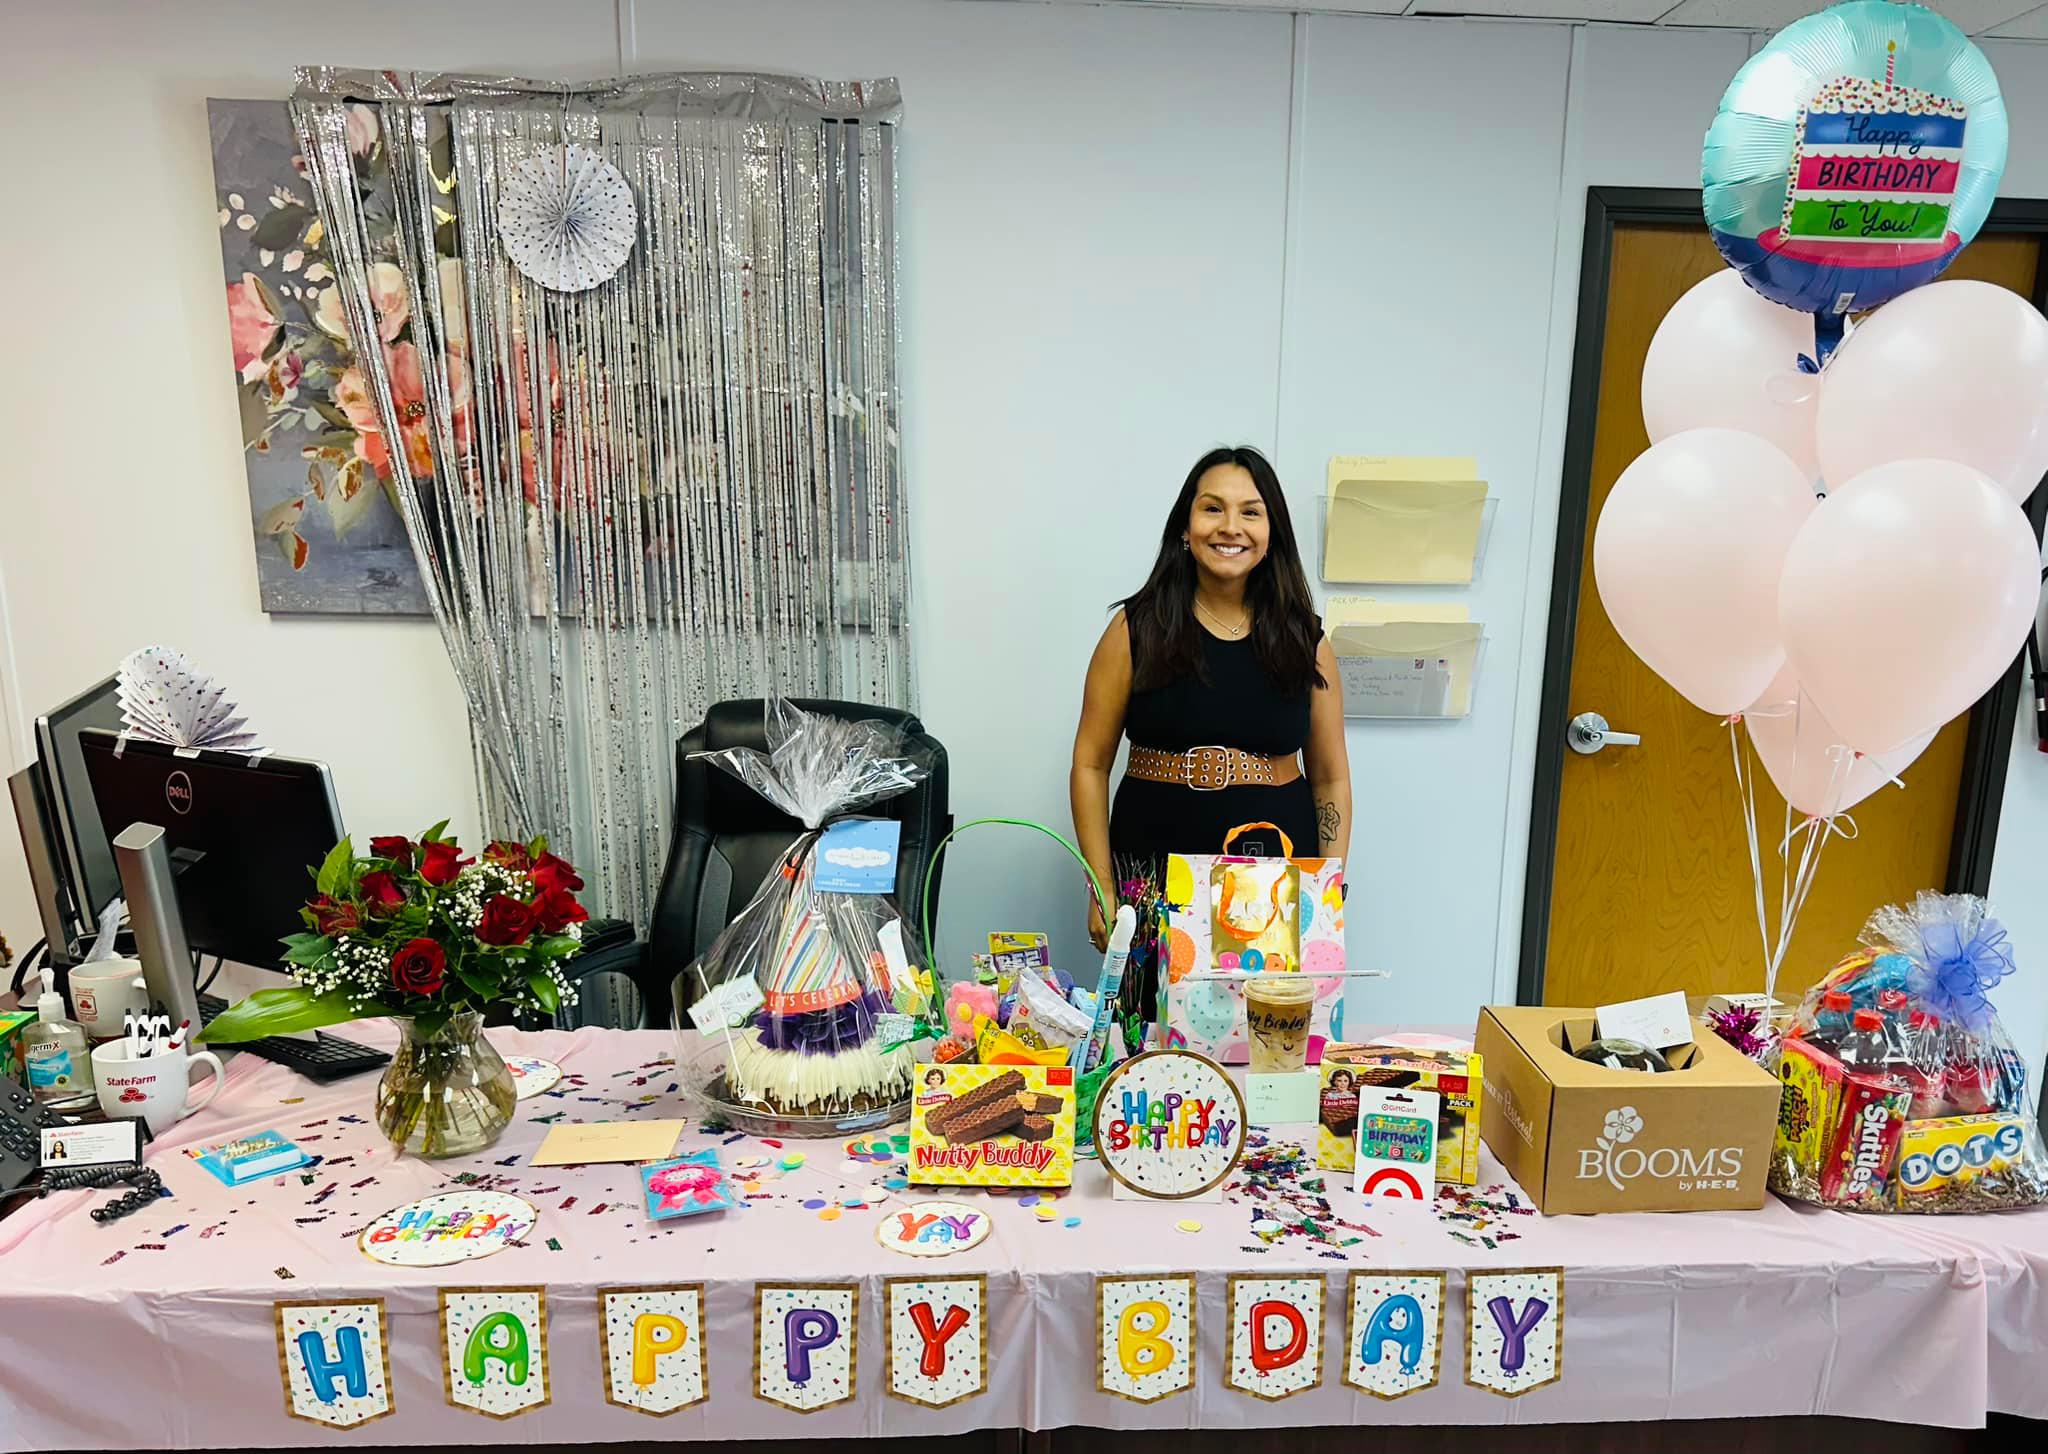 Happy Birthday Brianna!!
Wishing you many more years full of success and happiness! Thank you for ev Isabel Degollado - State Farm Insurance Agent San Antonio (210)438-5826